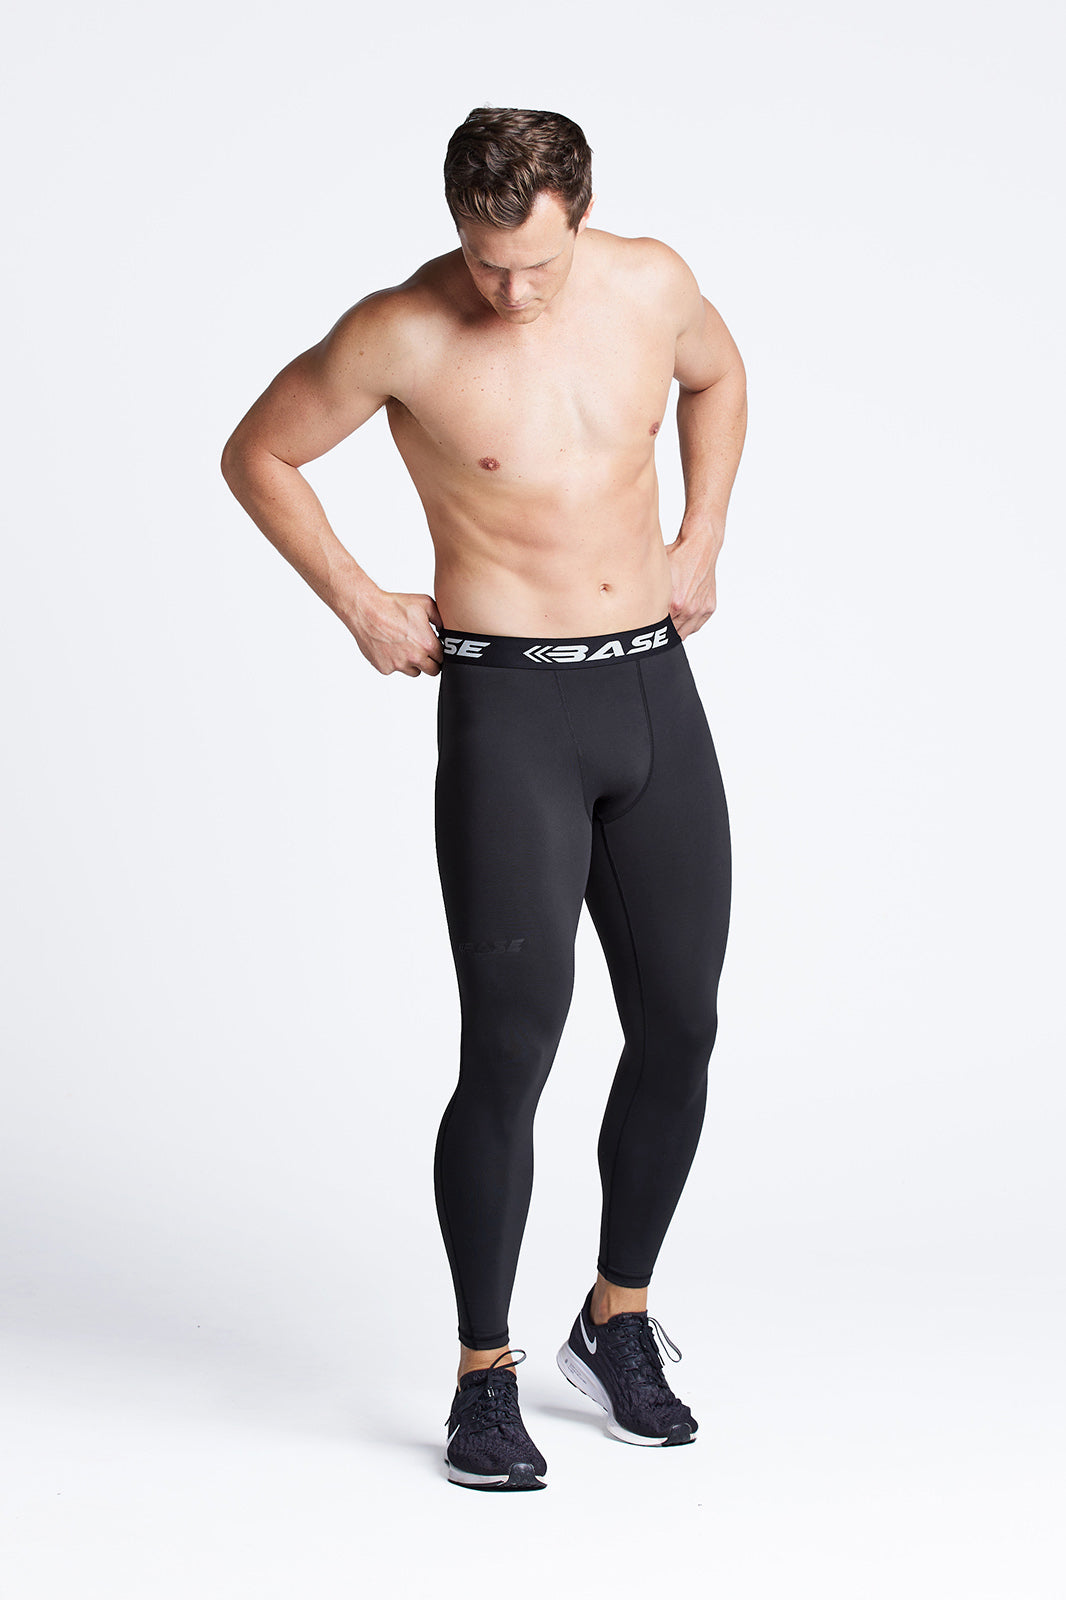 BASE Men's Recovery Tights - Black – BASE Compression